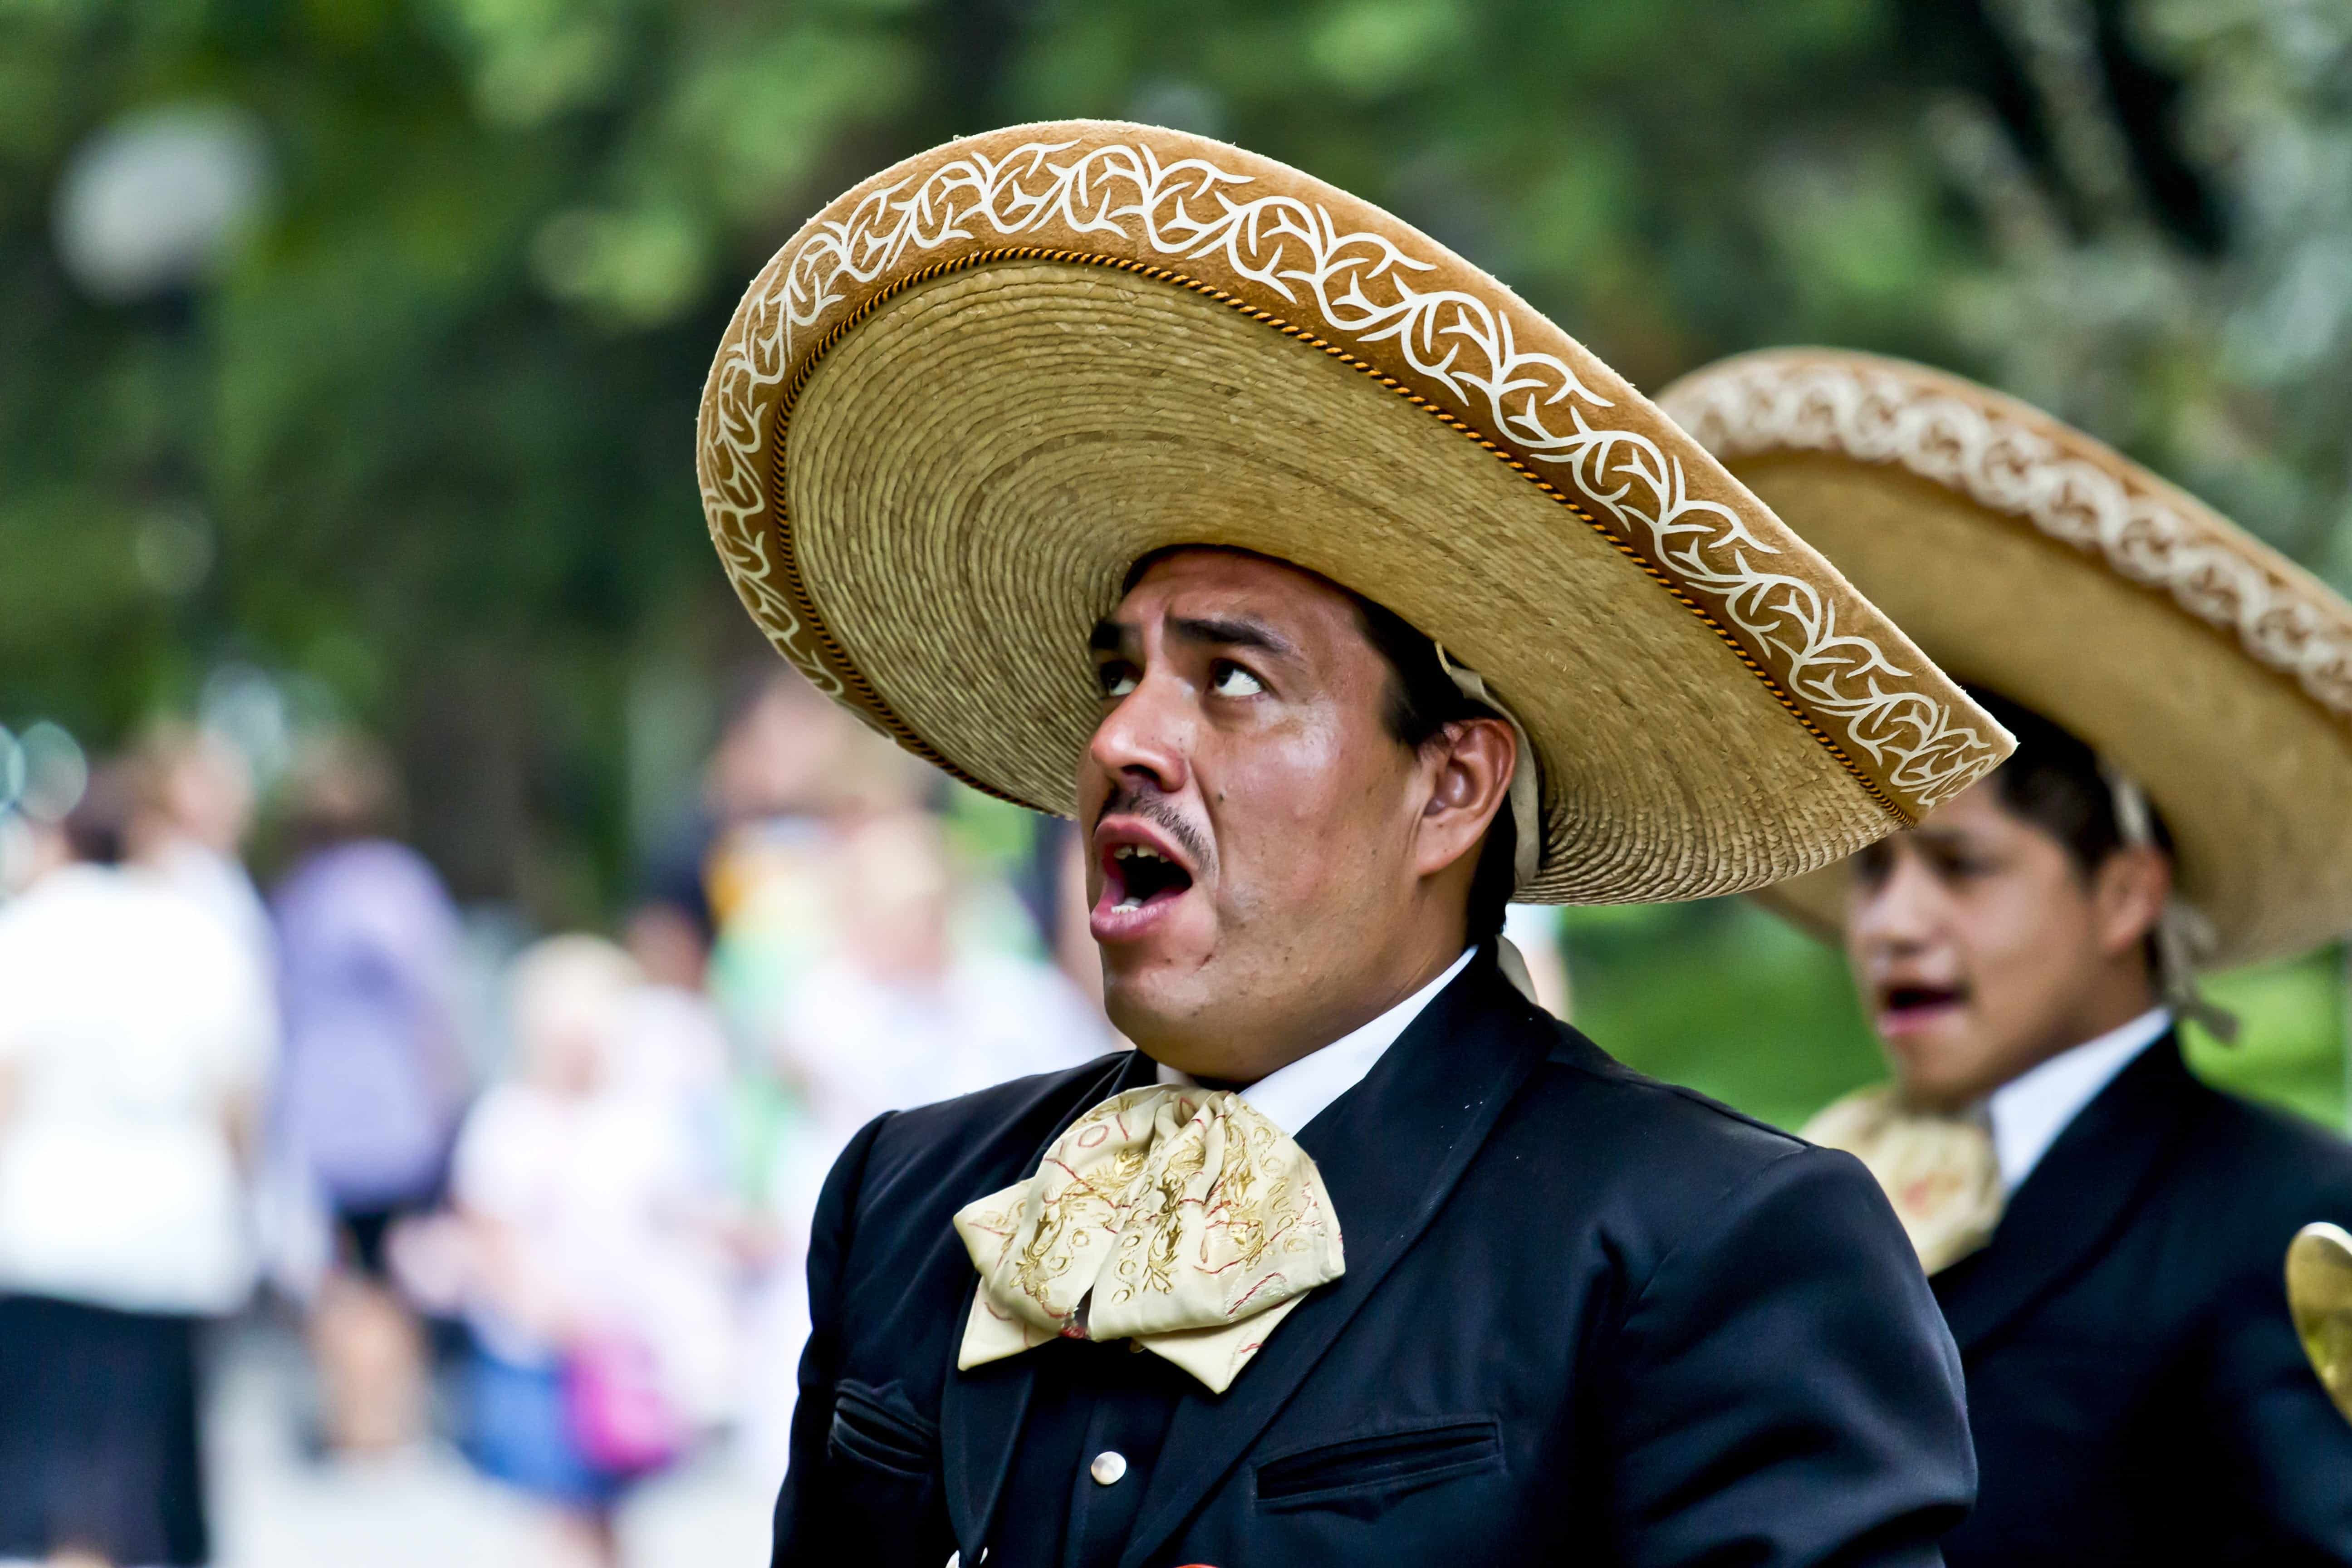 A Mexican man wearing a sombrero sings